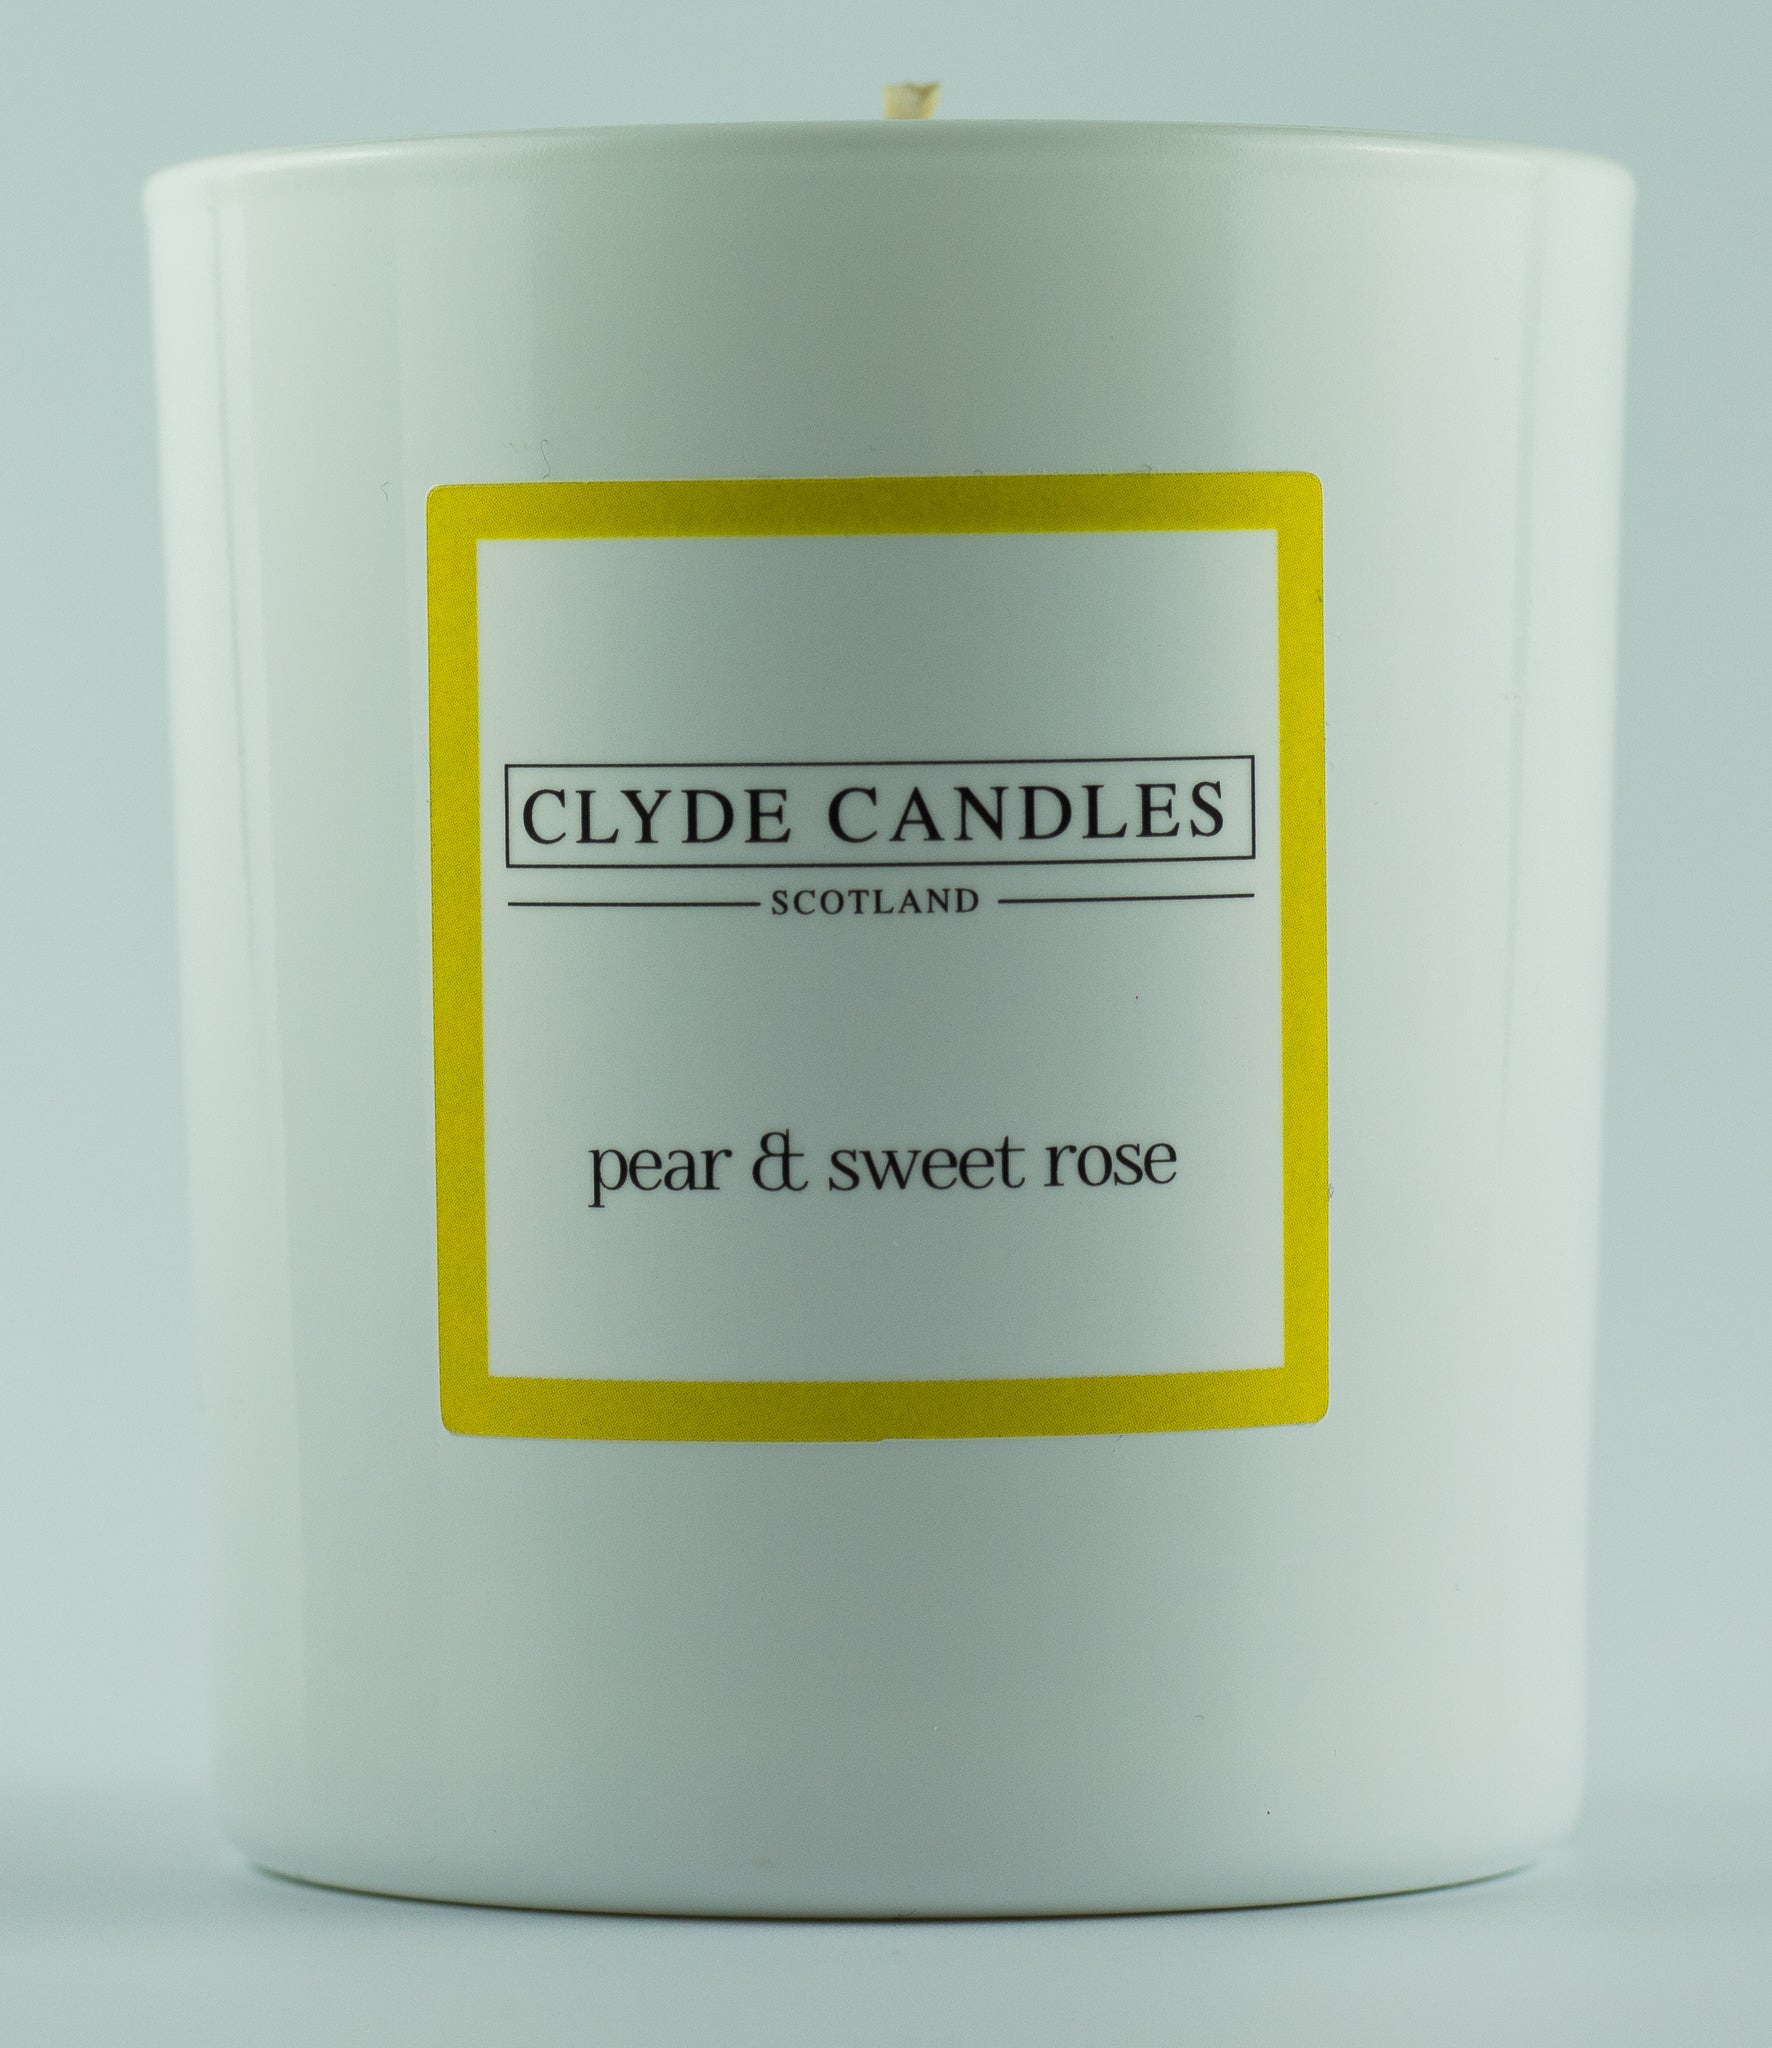 Clyde candles pear and sweet rose glass gift box hand made soy candle made in scotland